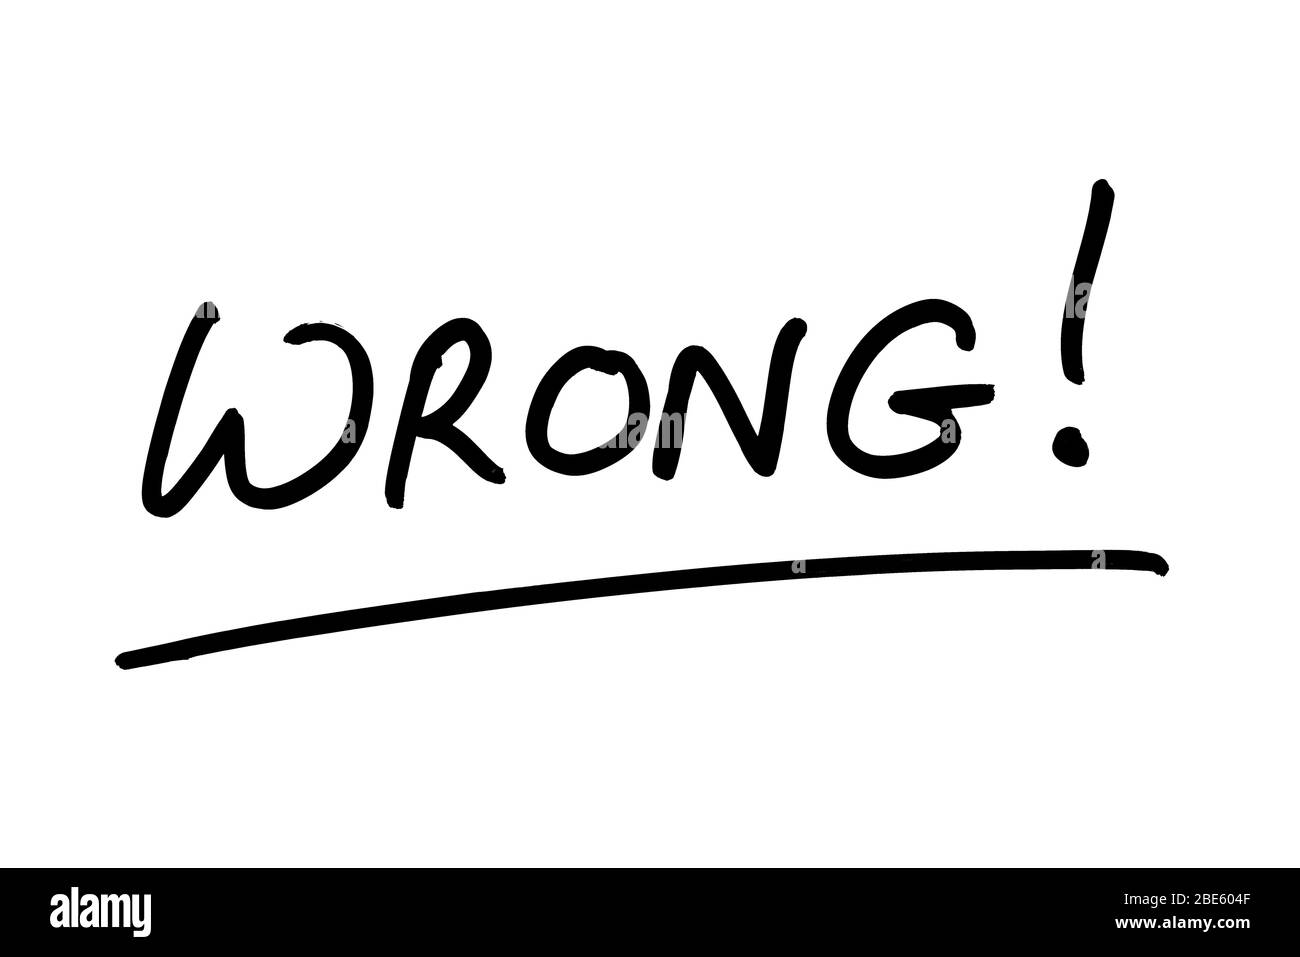 WRONG! handwritten on a white background. Stock Photo